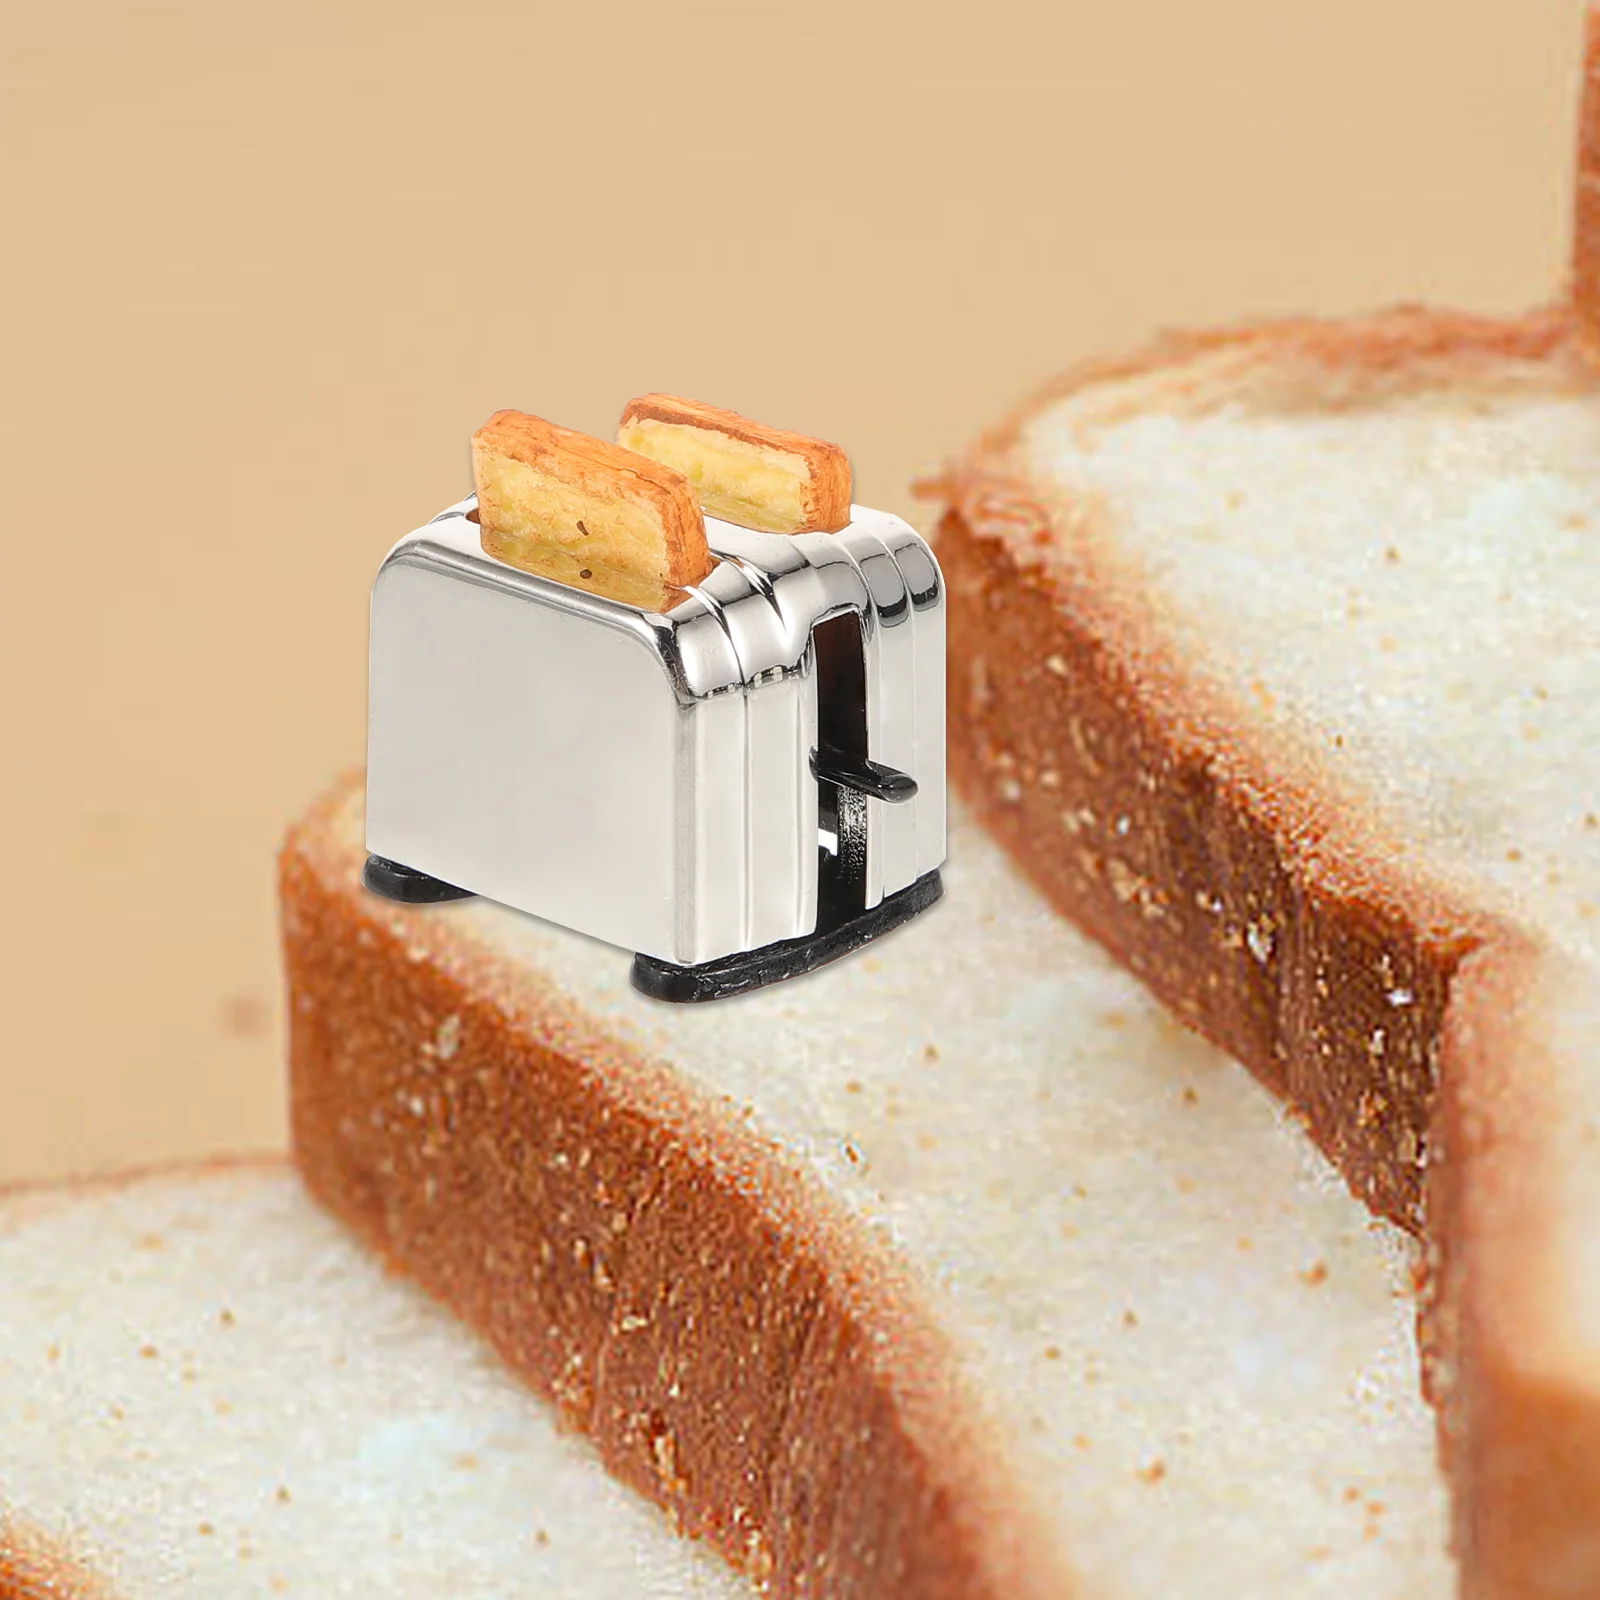 

Dollhouse Bread Maker Simulated Kitchenware Toy Layout Accessory Toaster Toys Kids Micro Miniature Model Metal Child